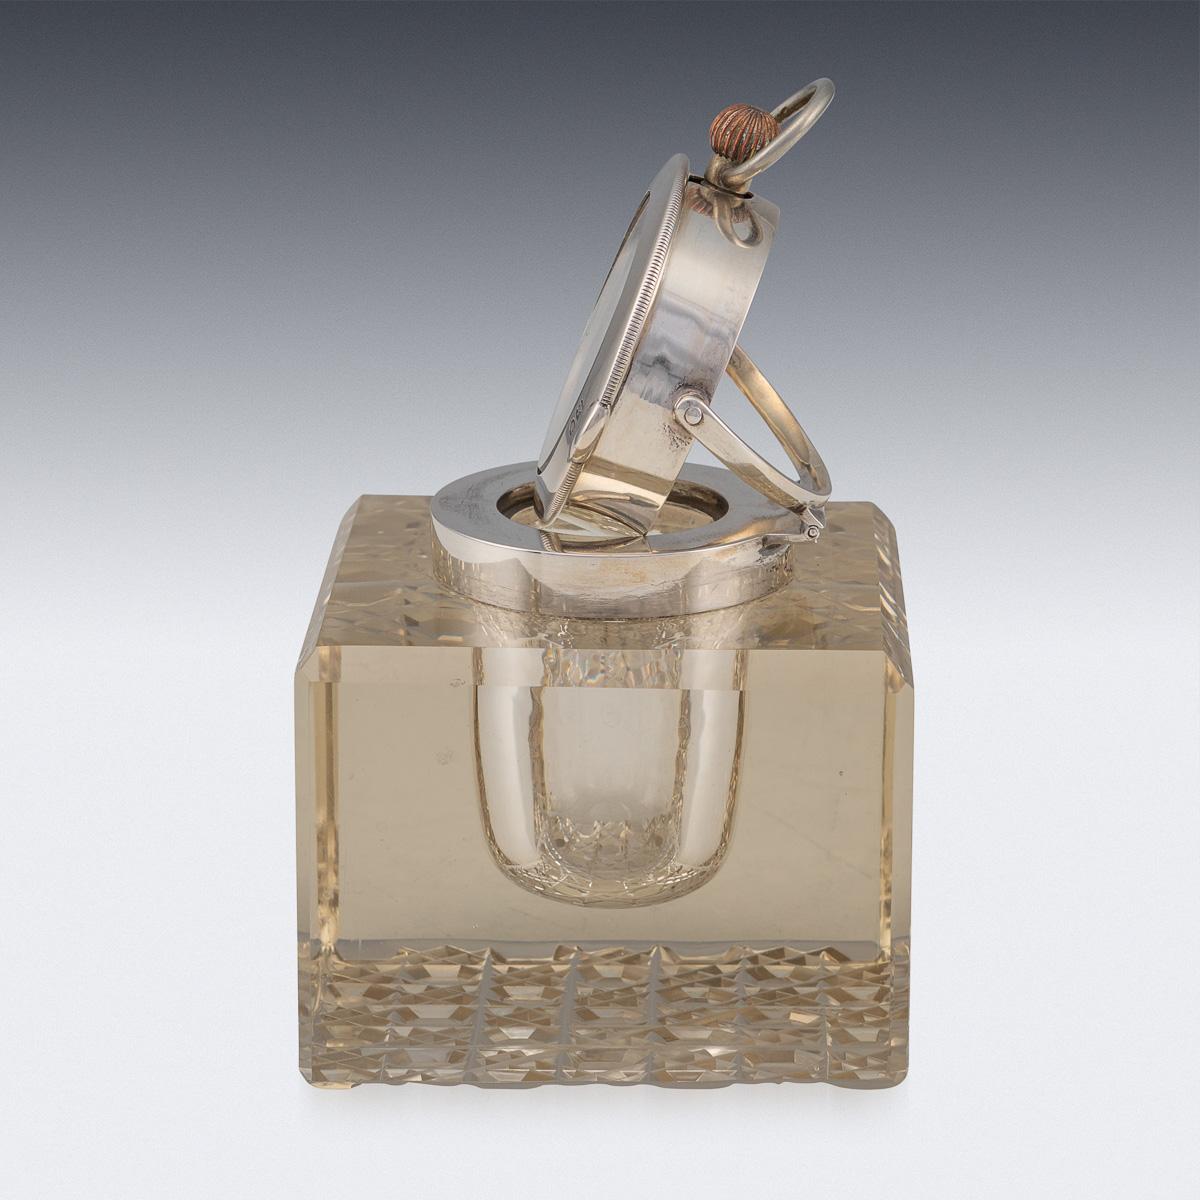 Gilt 20th Century Edwardian Solid Silver & Glass Inkwell with Clock, London, c.1909